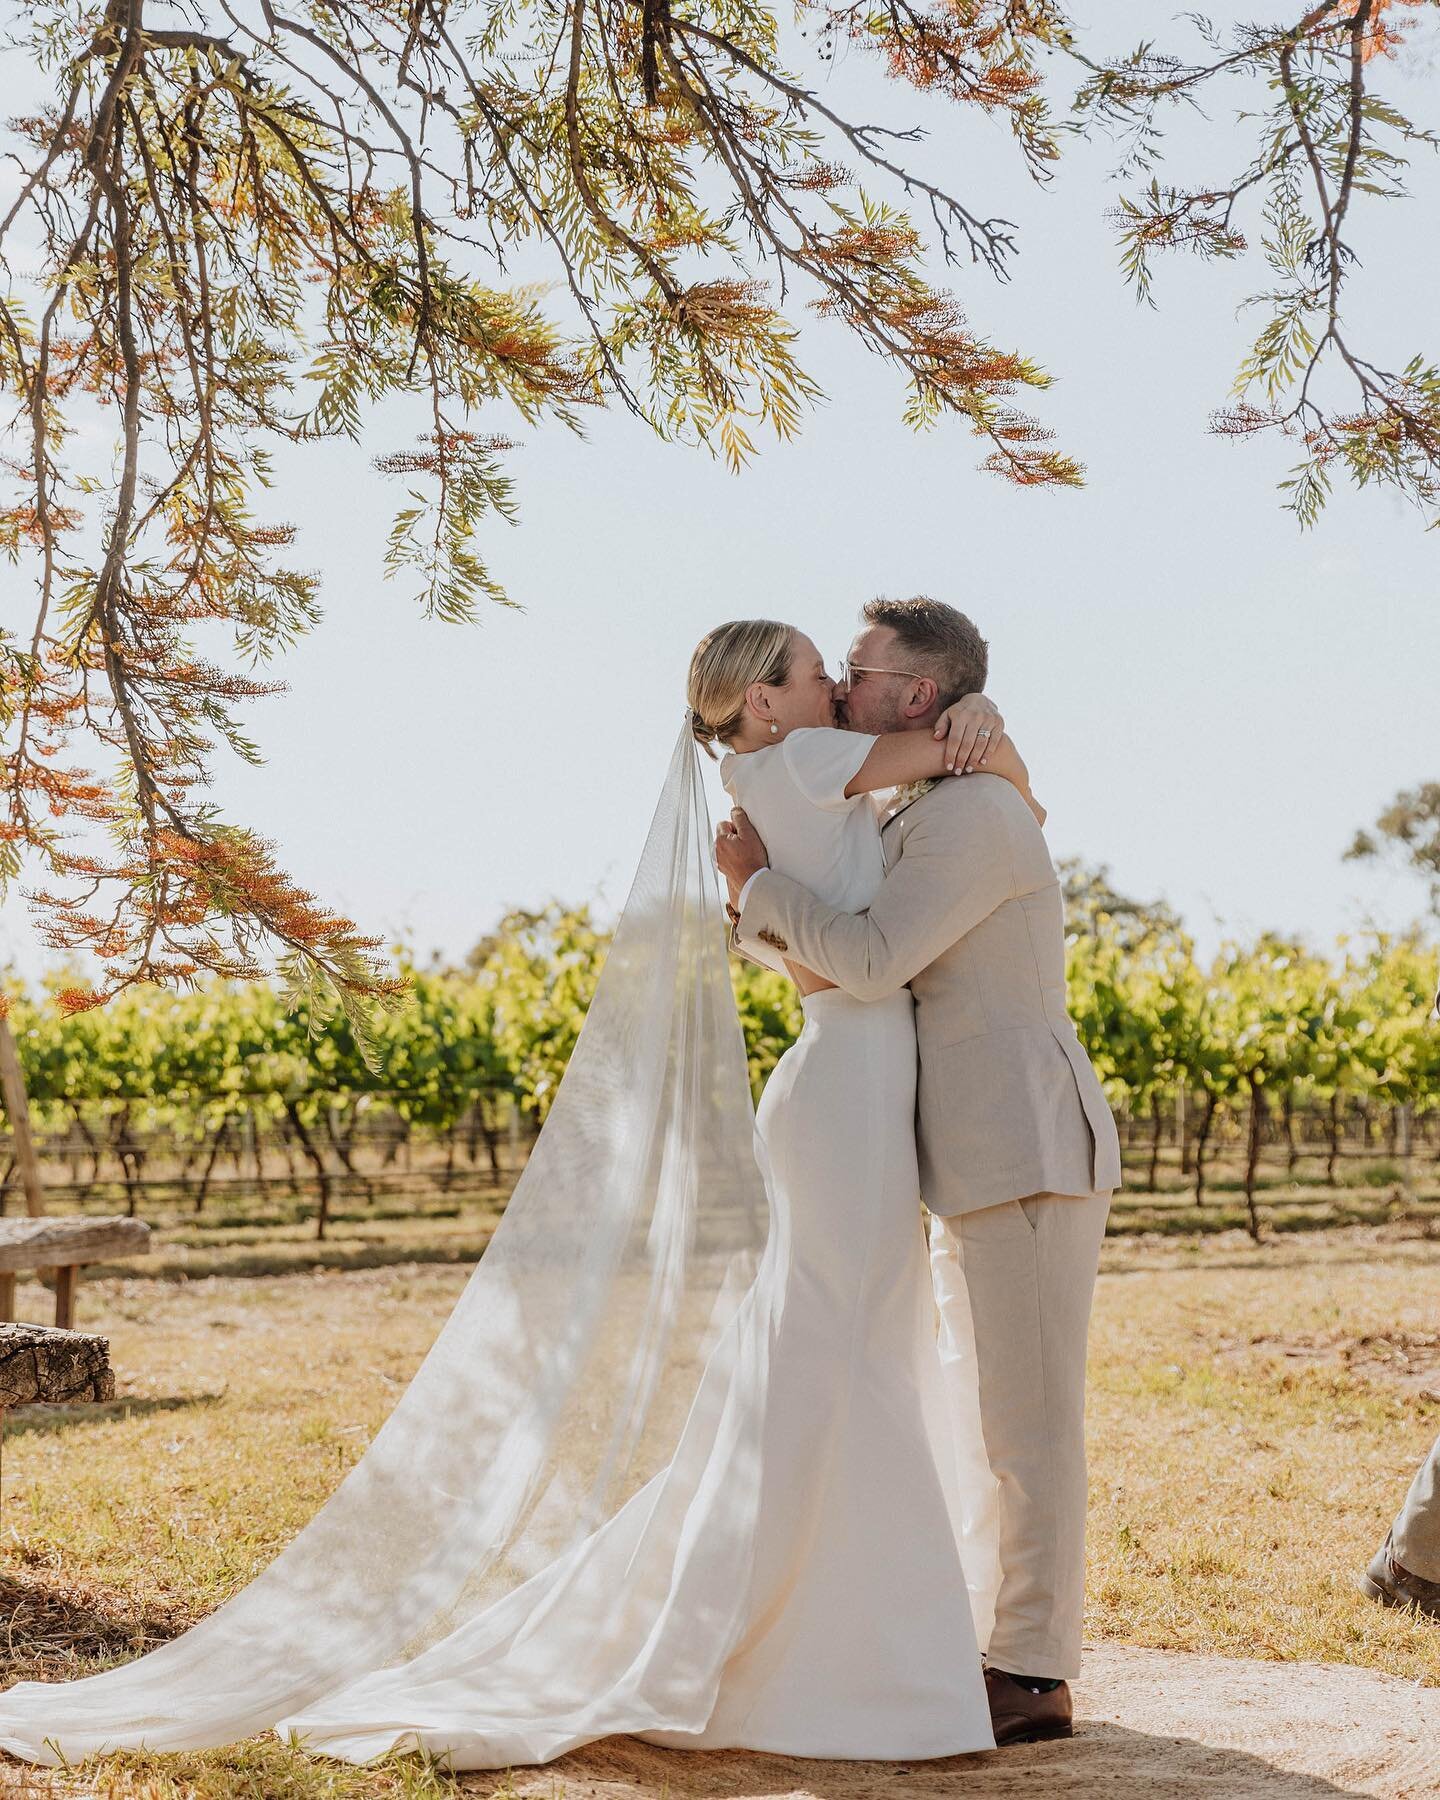 It was a beautiful, perfectly-spring-hot afternoon amongst the vines when @caseyaburgess and @mattmeffan spoke intimate, tear-jerking vows in front of their nearest and dearest, including their furry friend Taco 🐶 💕

#destinationwedding
#winerywedd